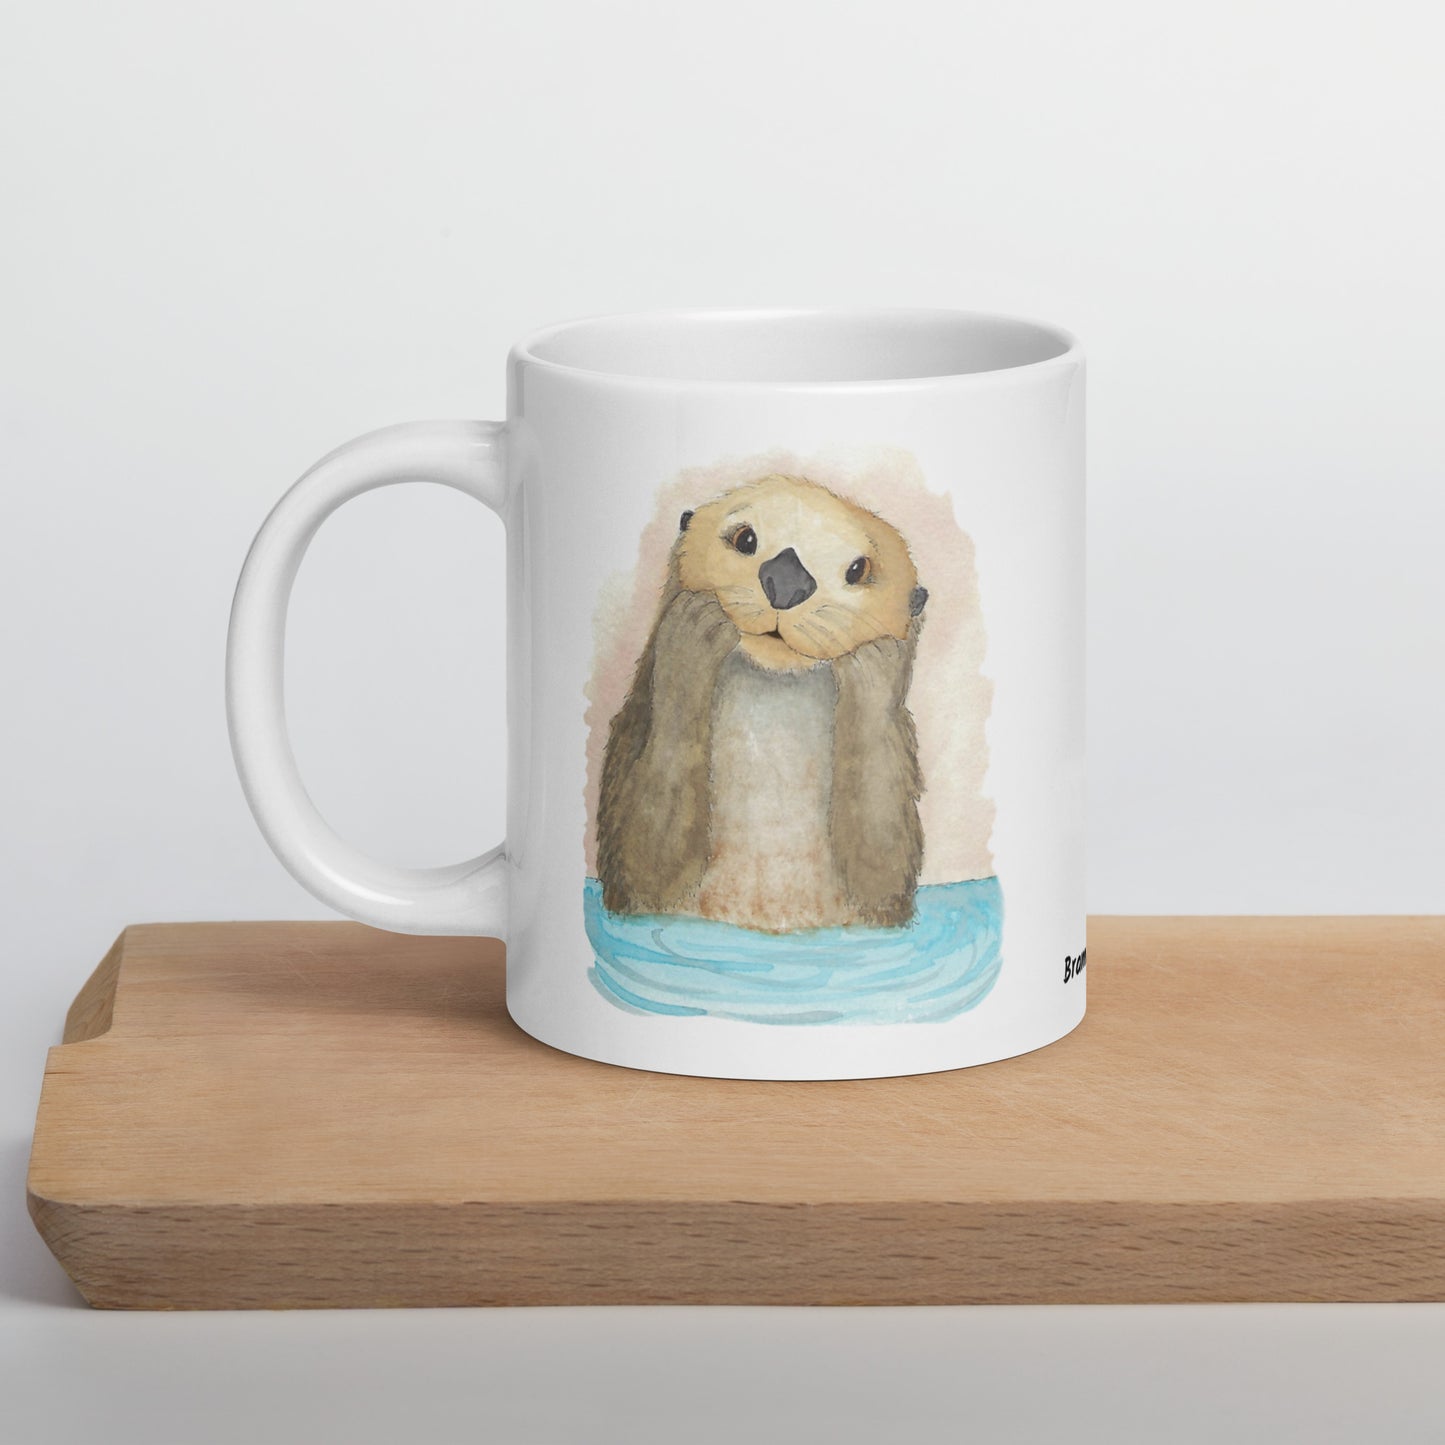 20 ounce white ceramic mug featuring watercolor print of a sea otter on both sides. Dishwasher and microwave safe. Shown on wooden tray.